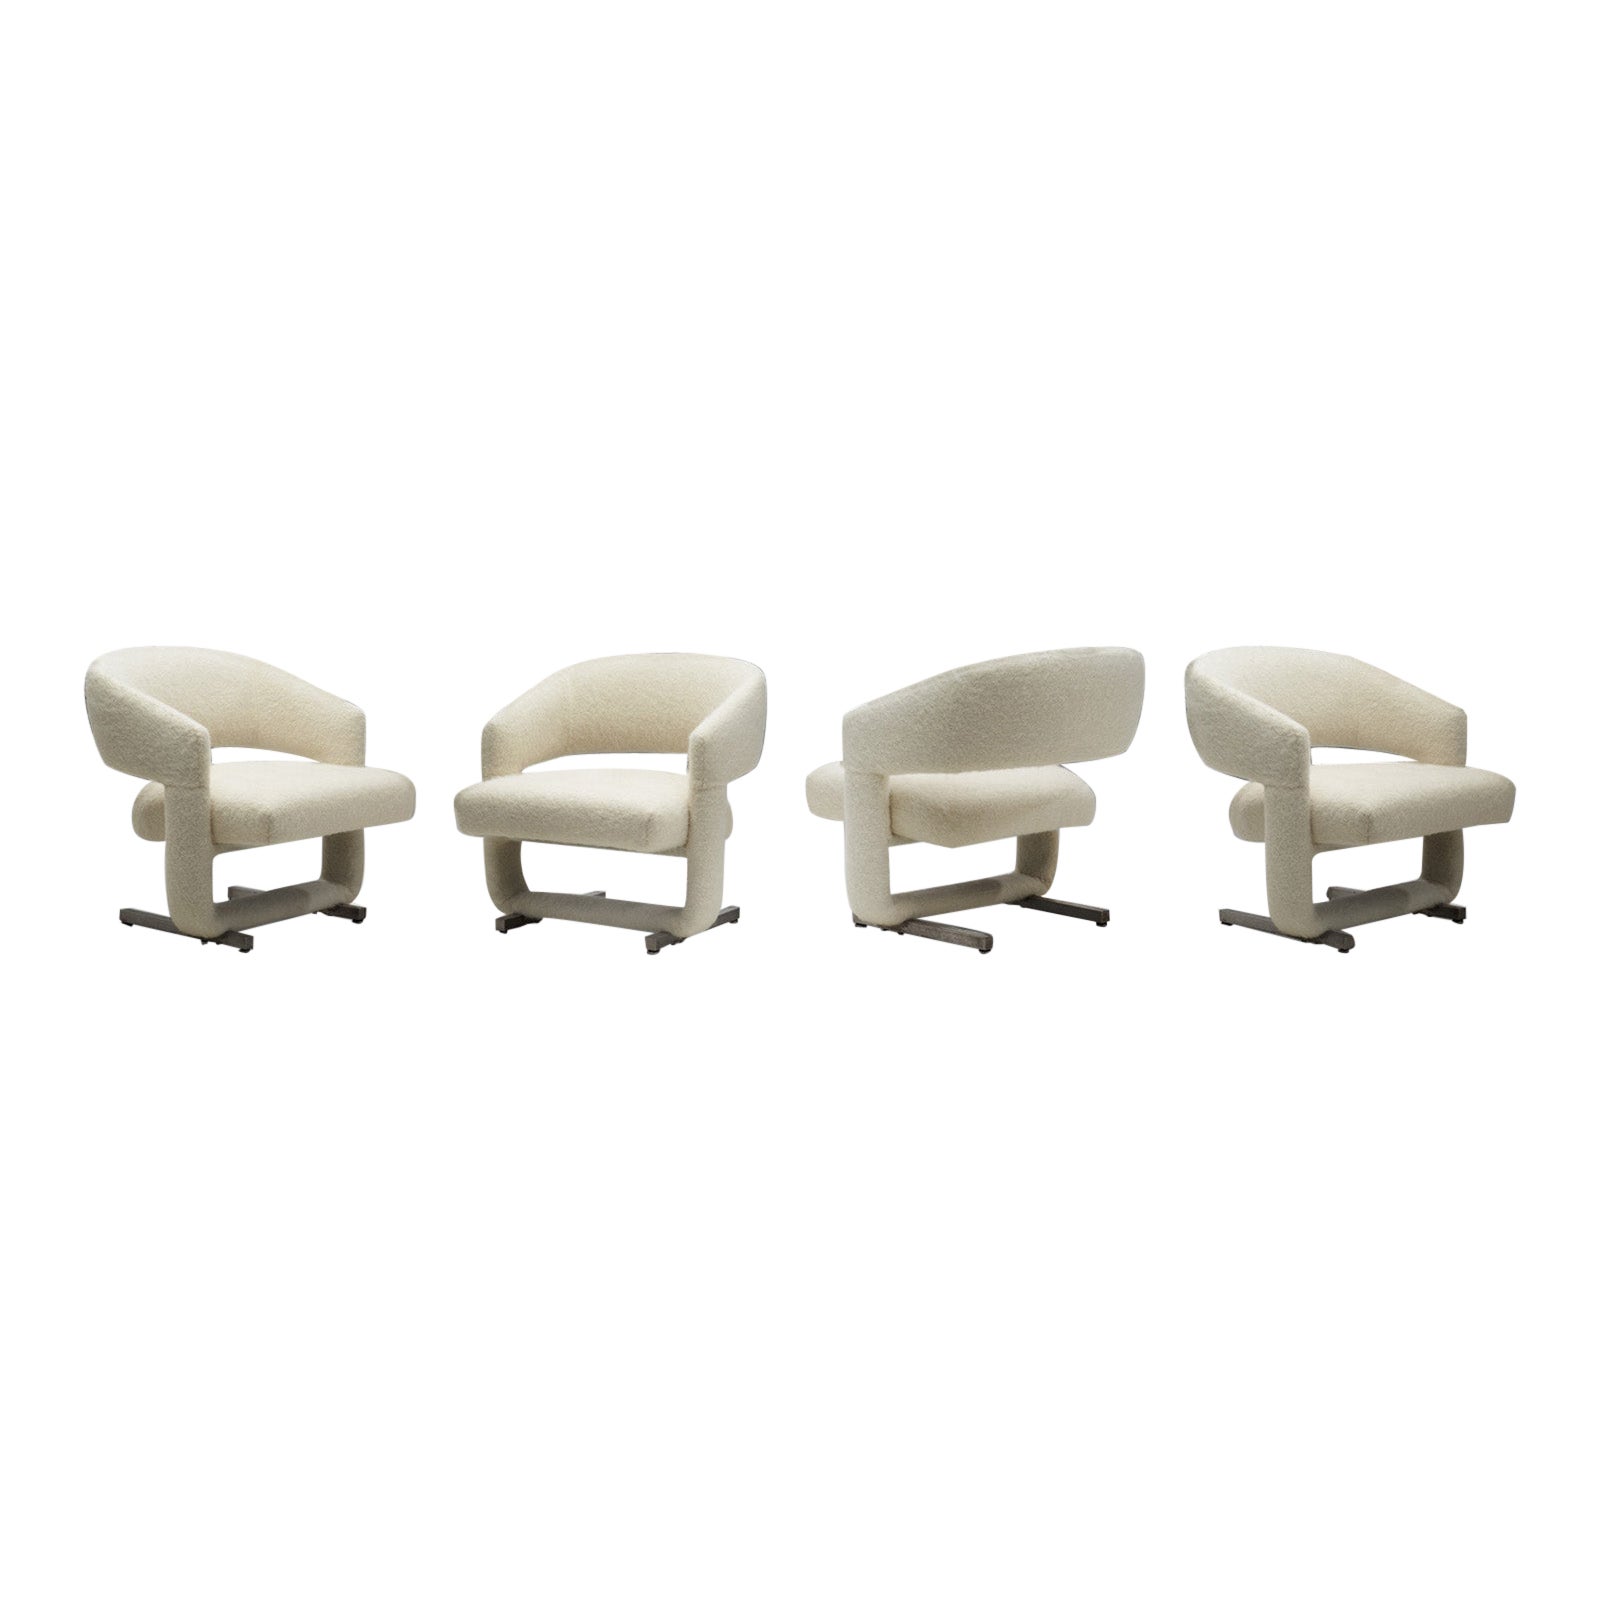 Sculptural Accent Chairs with Metal Legs, Europe ca 1960s For Sale